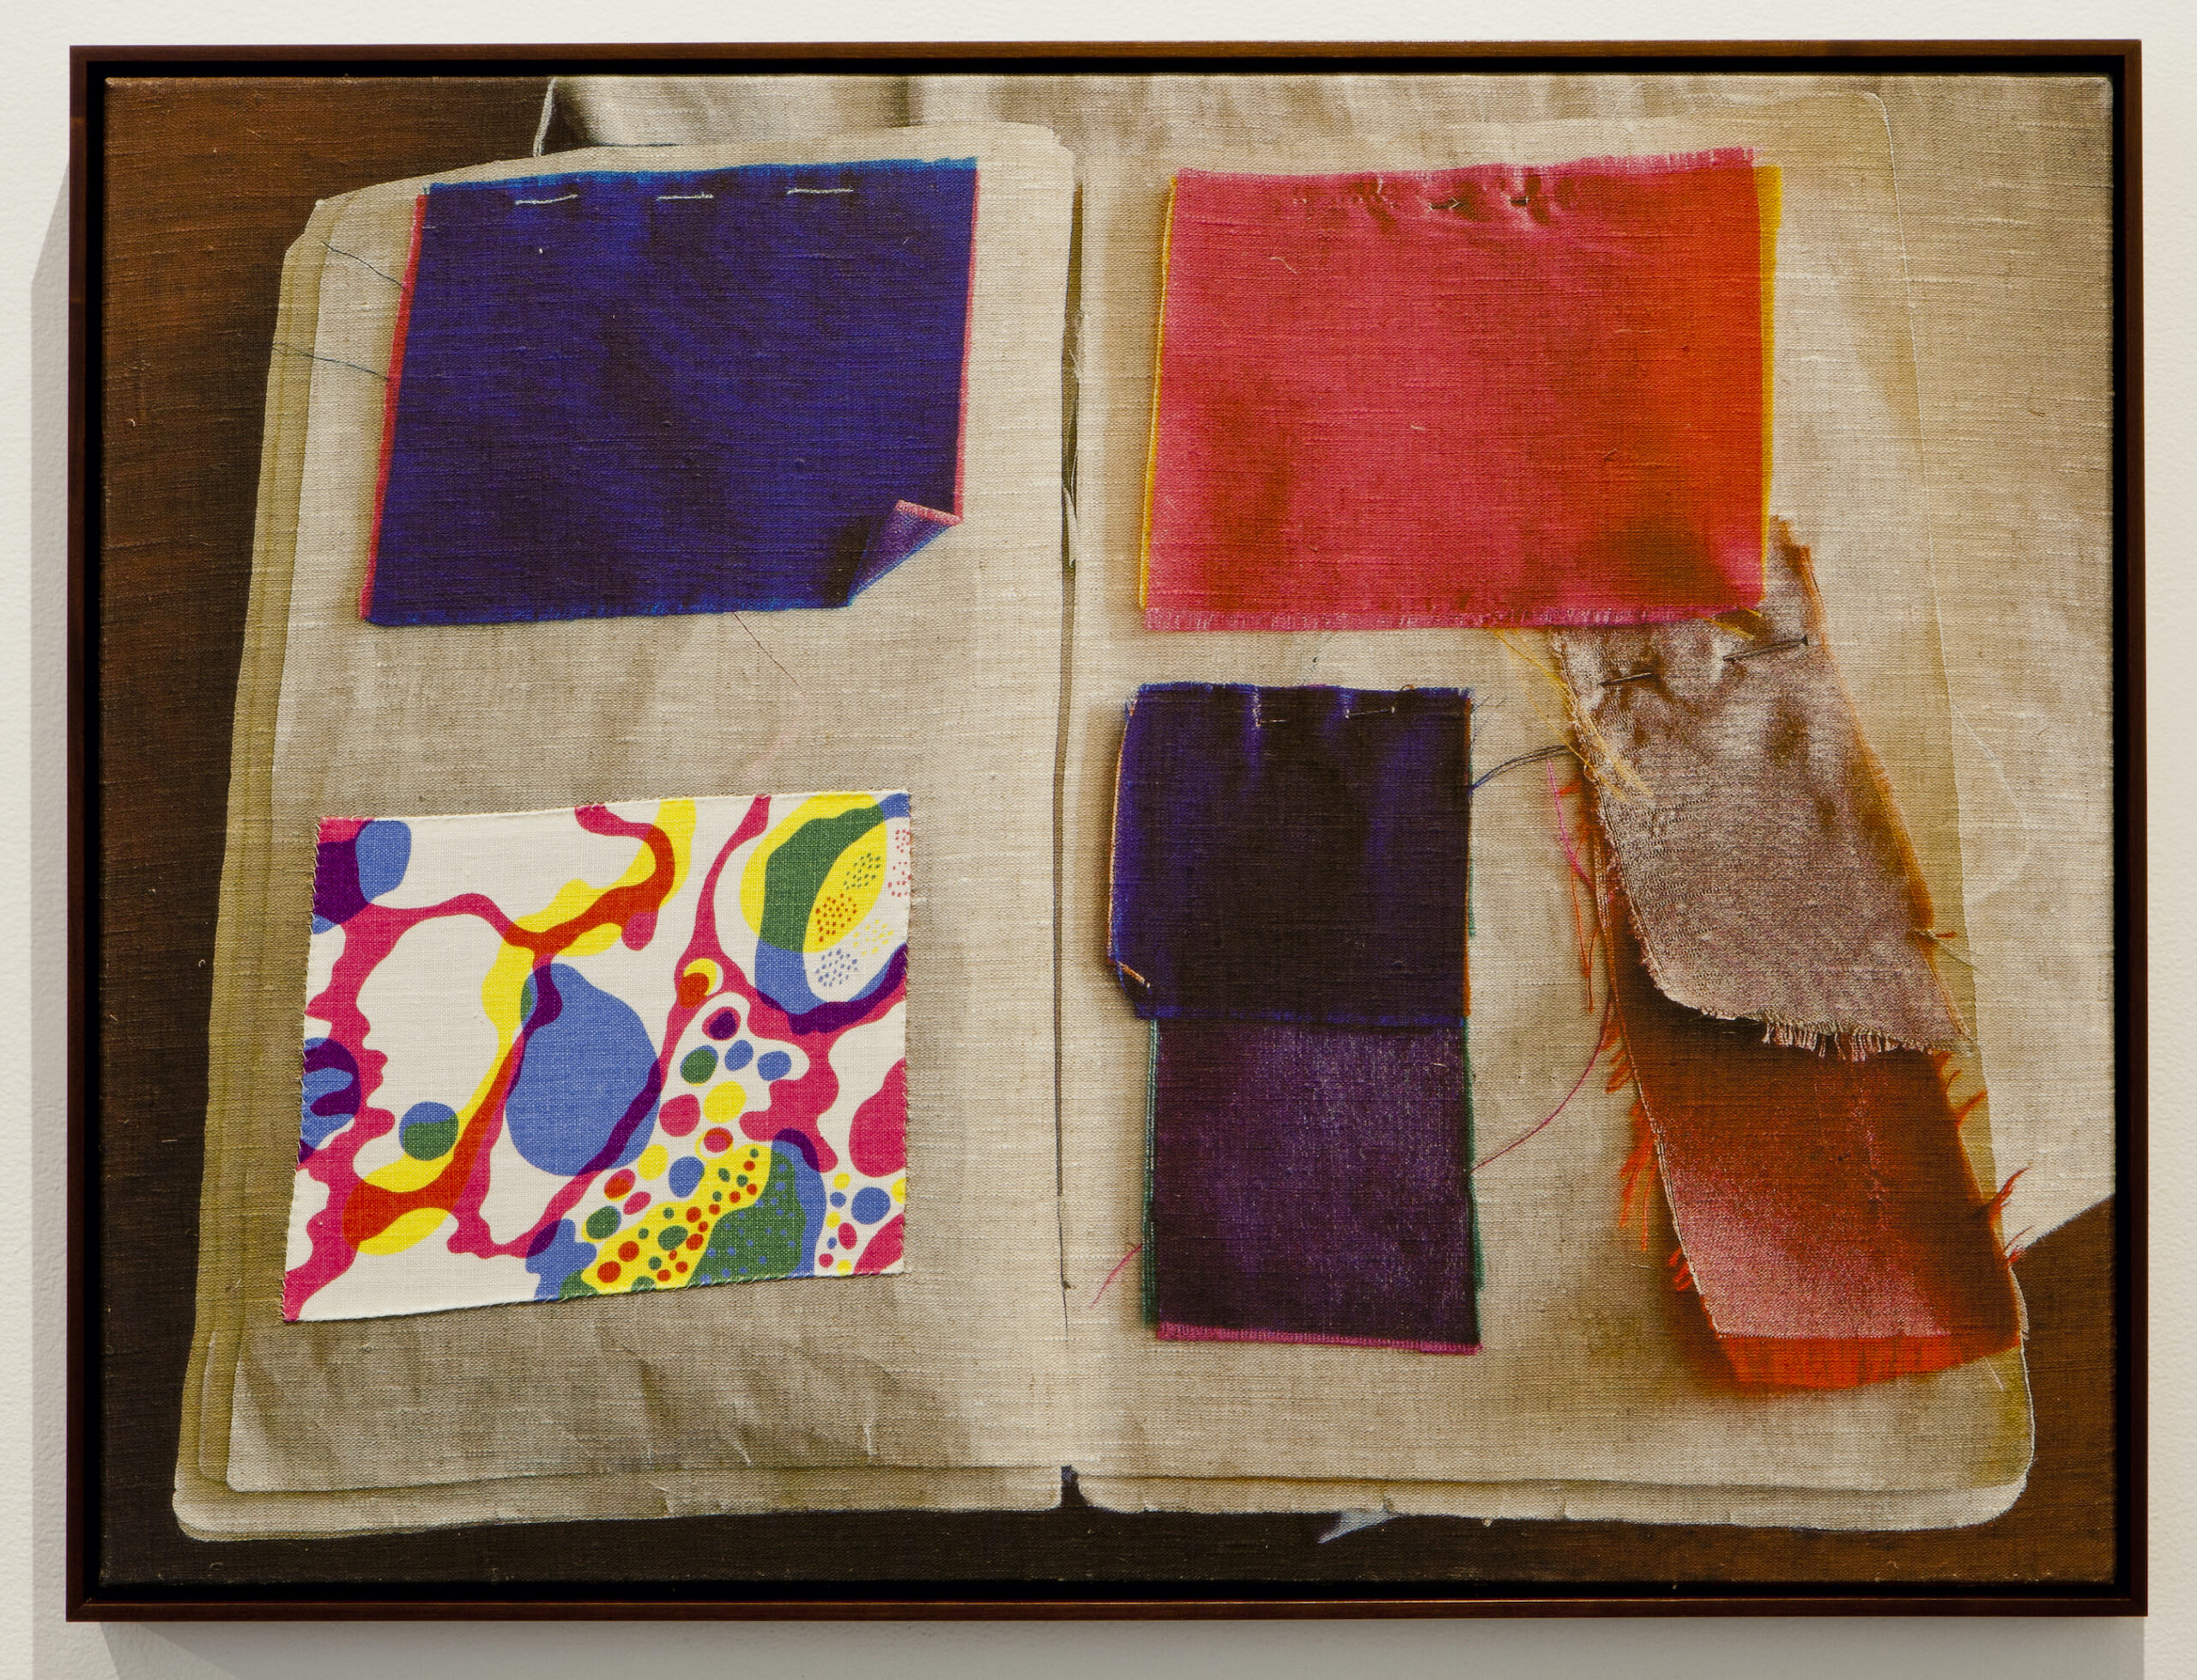 Various fabric swatches in an opened book.